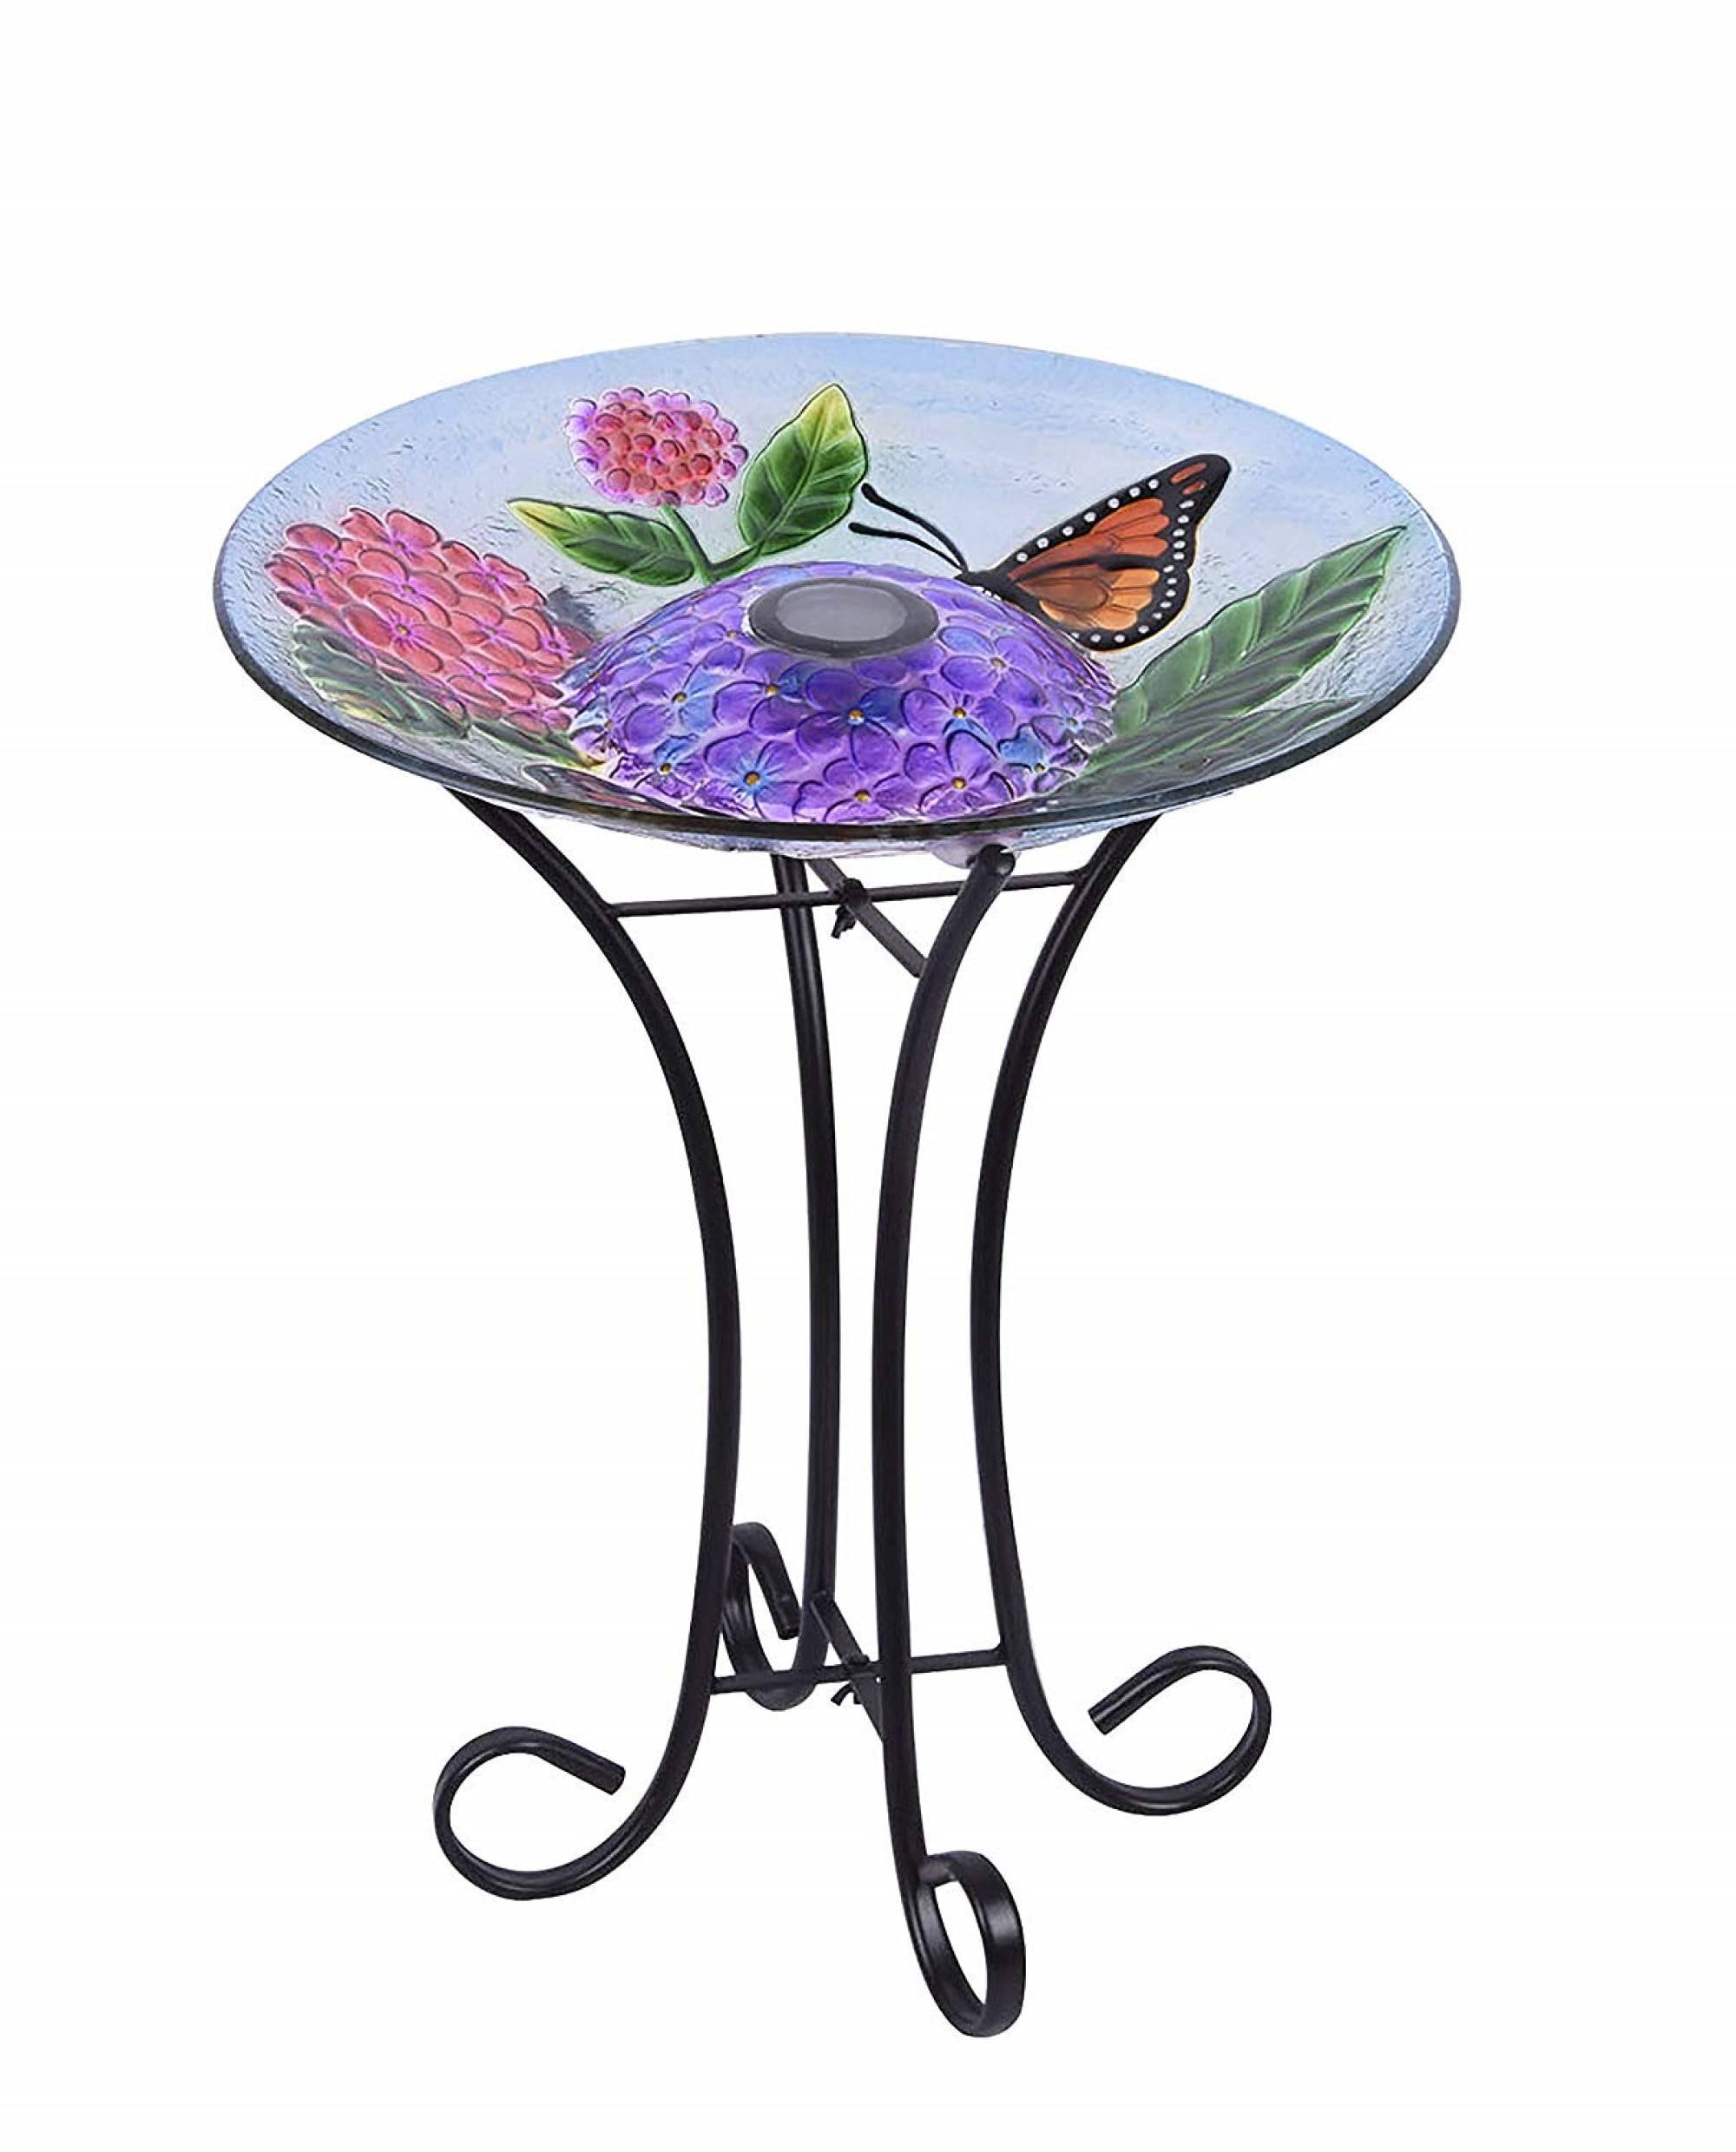 Bowl with Floral and Butterfly Design